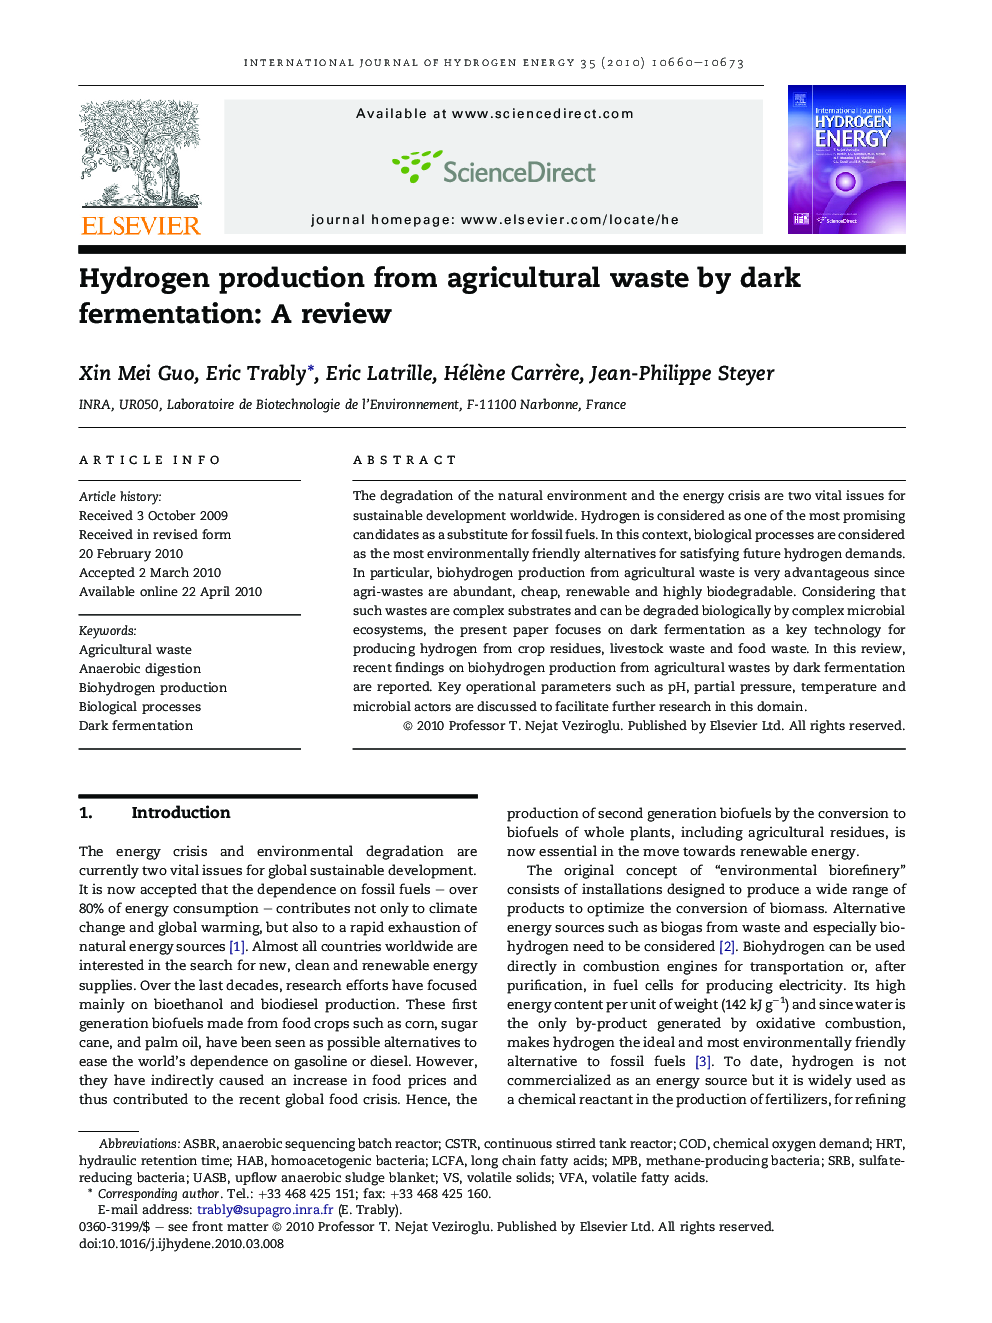 Hydrogen production from agricultural waste by dark fermentation: A review